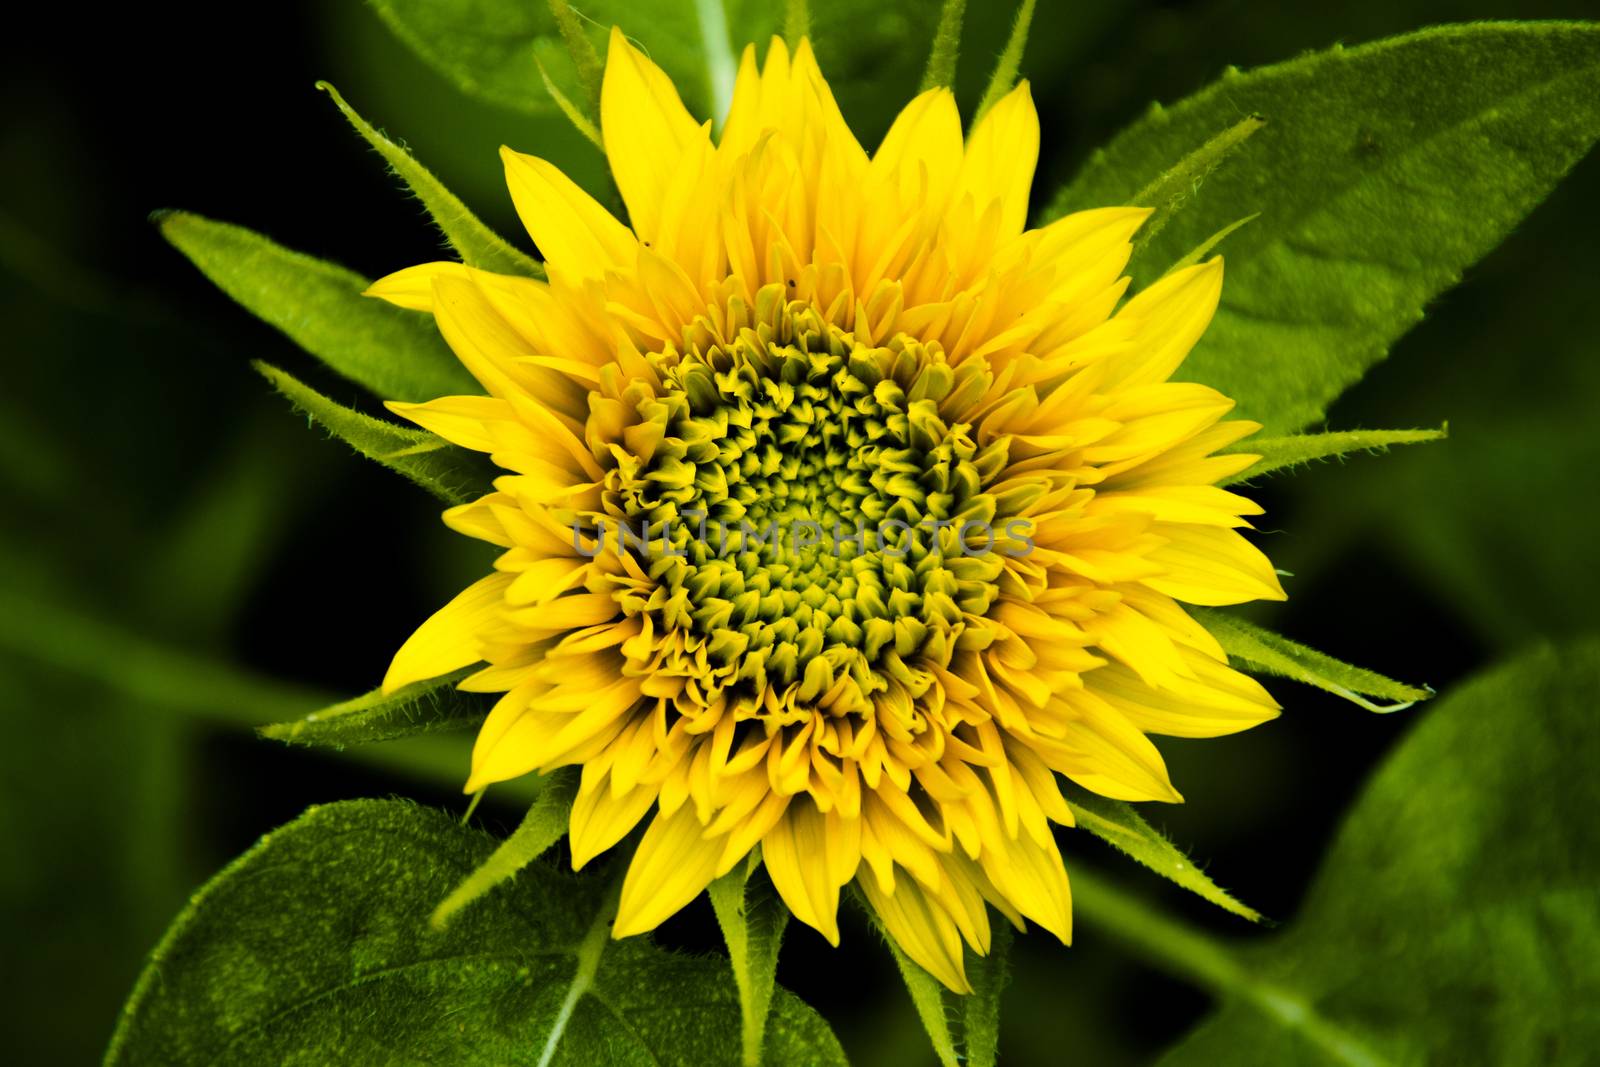 a dwarf sunflower sprouting a fresh yellow flower from the top and green leaves below